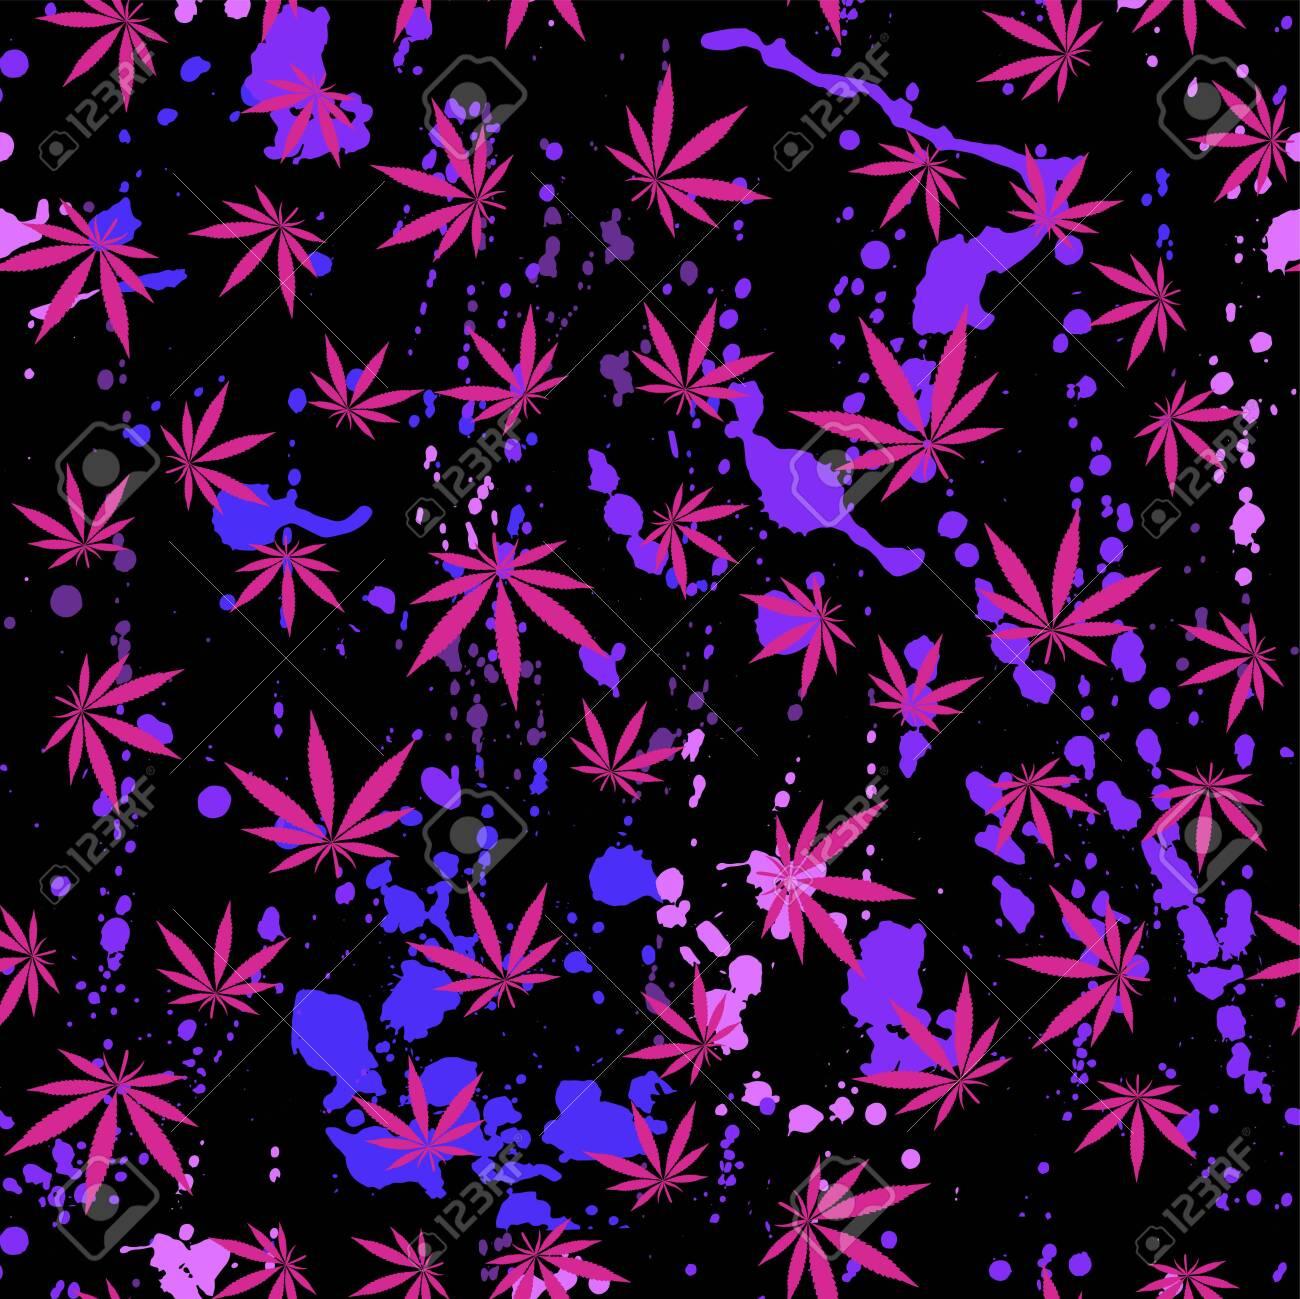 Bright Pink Neon Cannabis Leaves On A Black Abstract Background